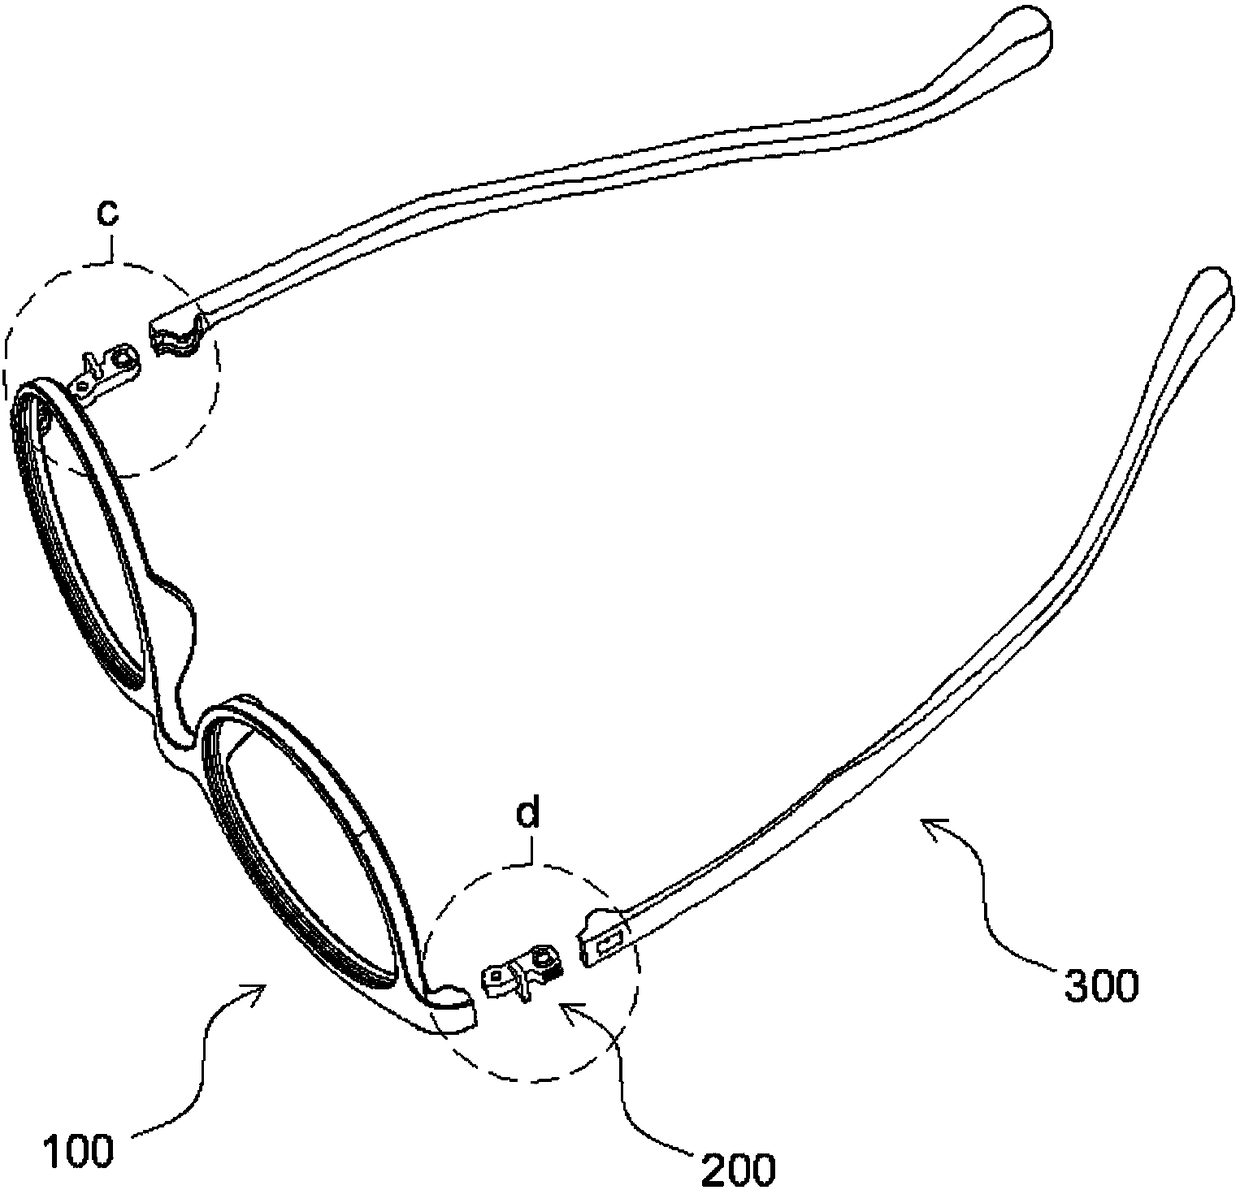 Combined structure of glasses frame and glasses hinge and glasses temples